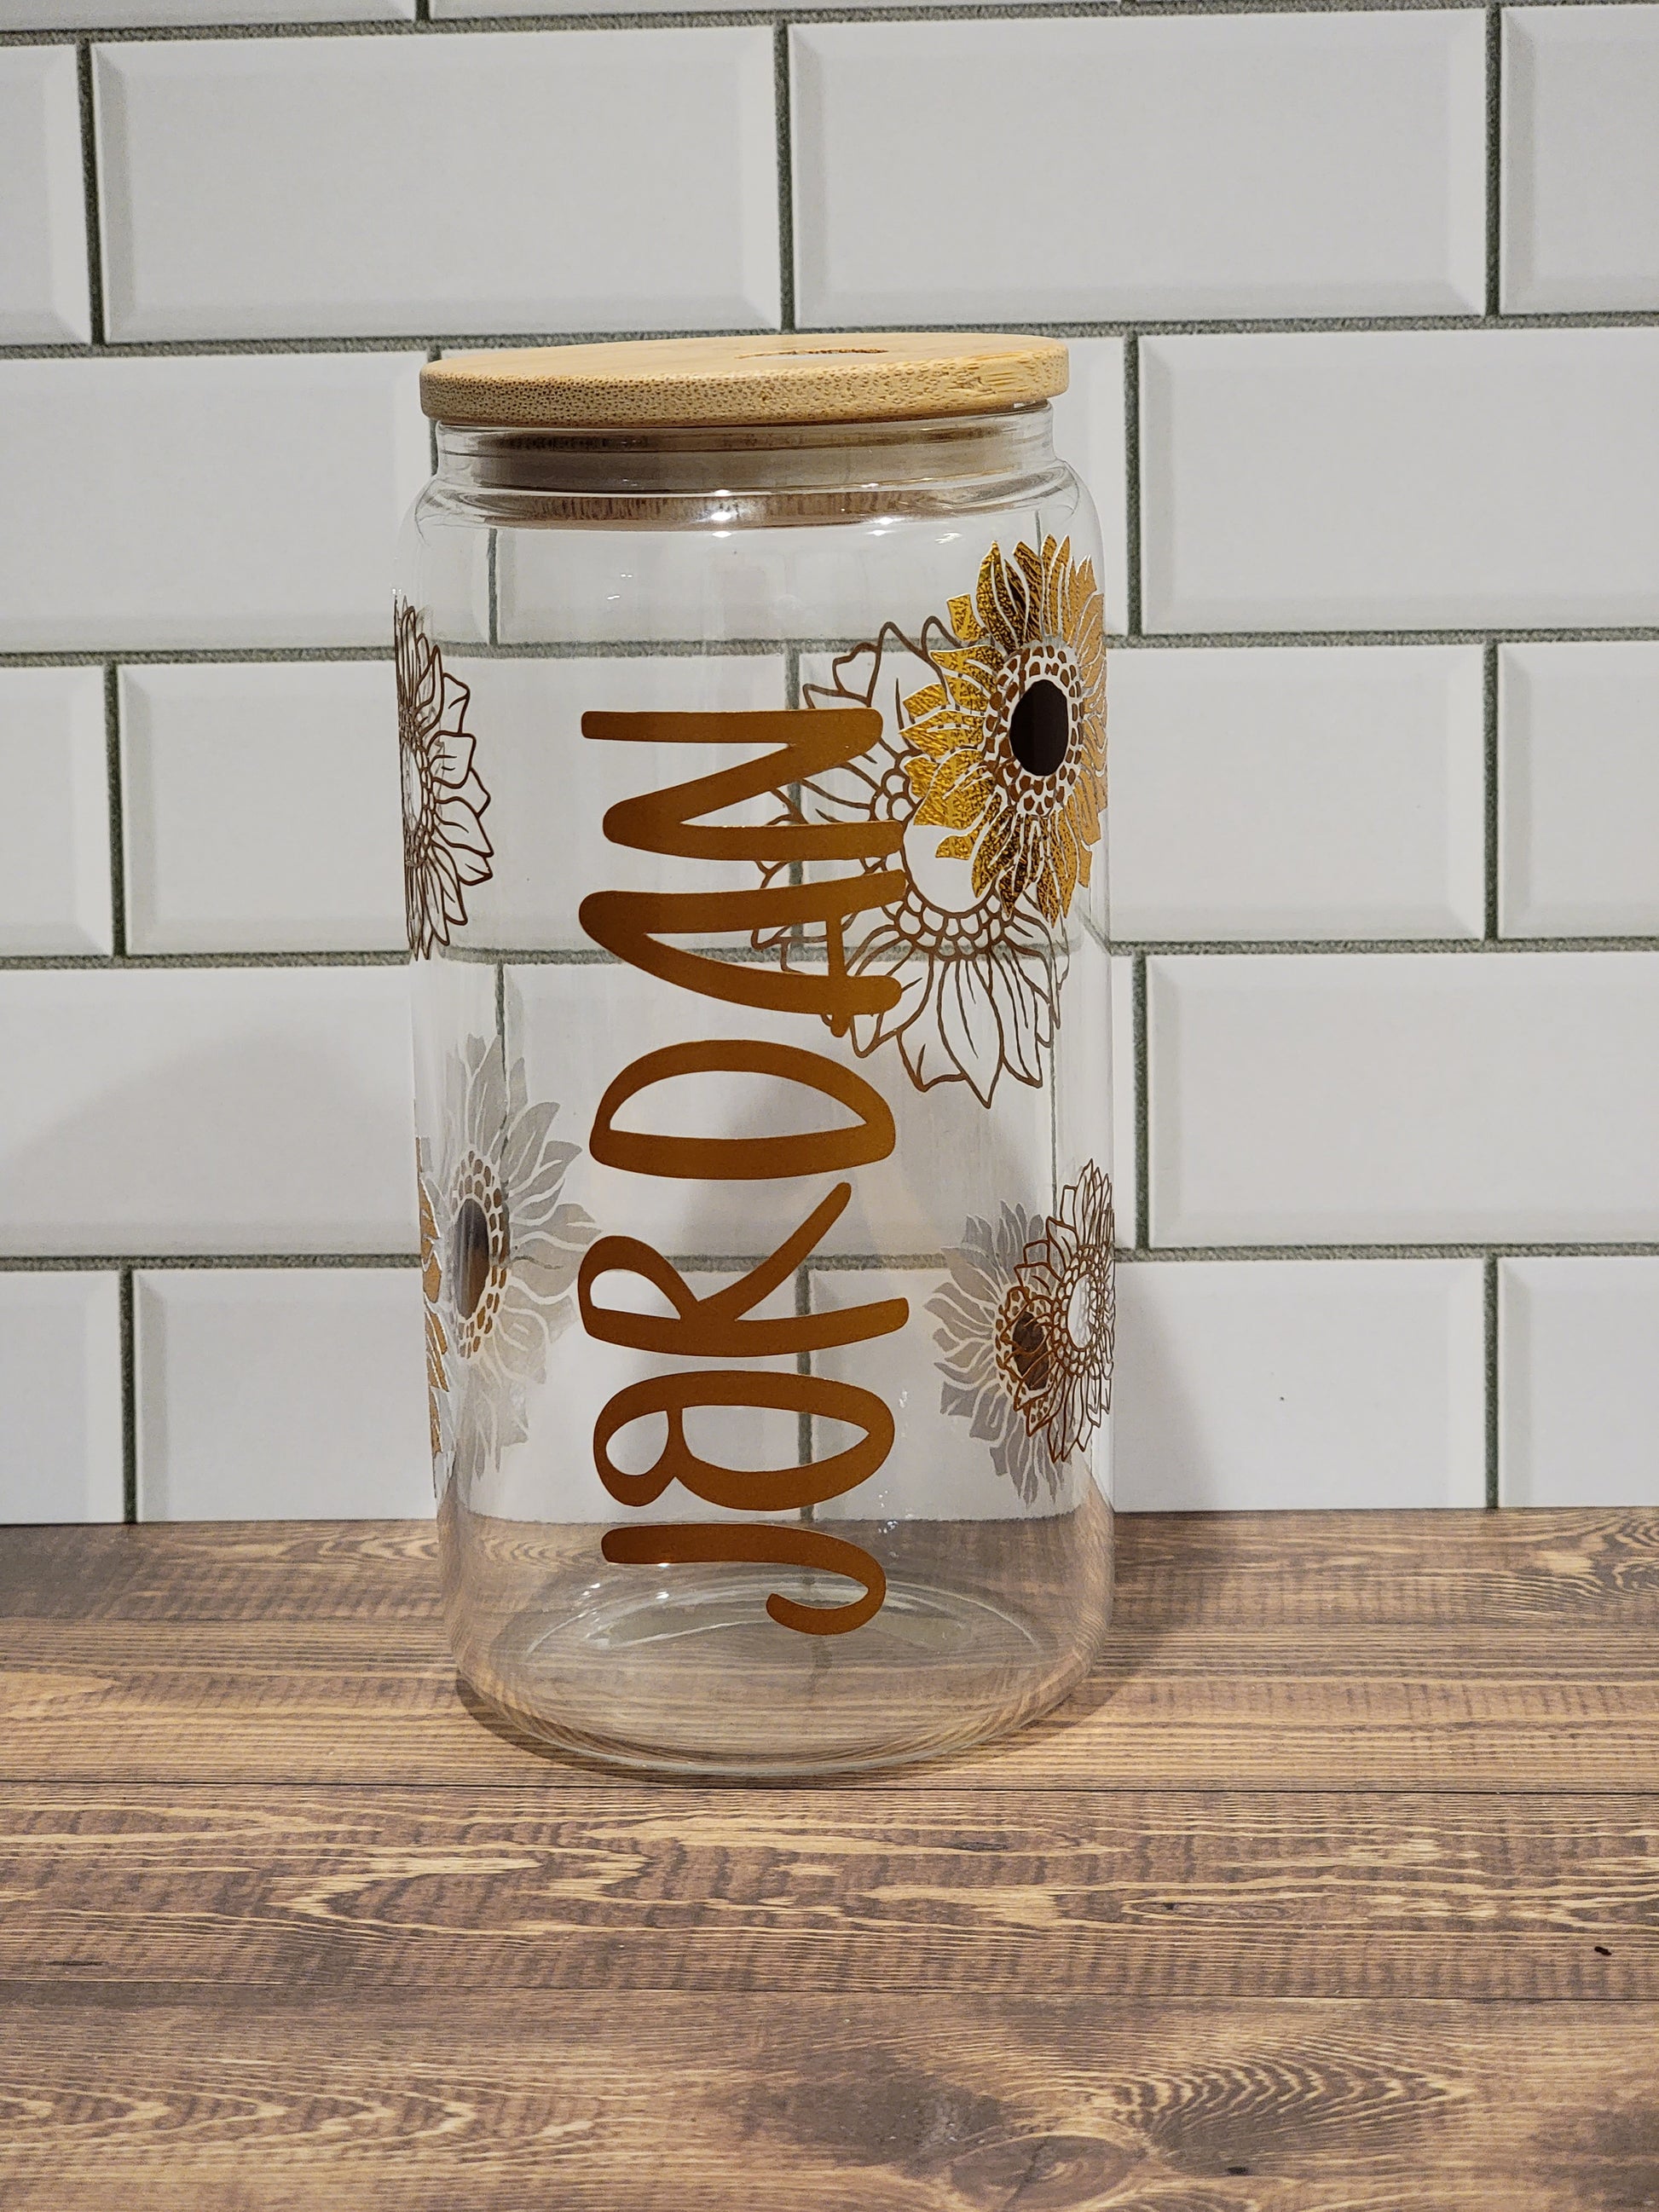 Kind Heart 16 oz Glass Cup with Bamboo Lid